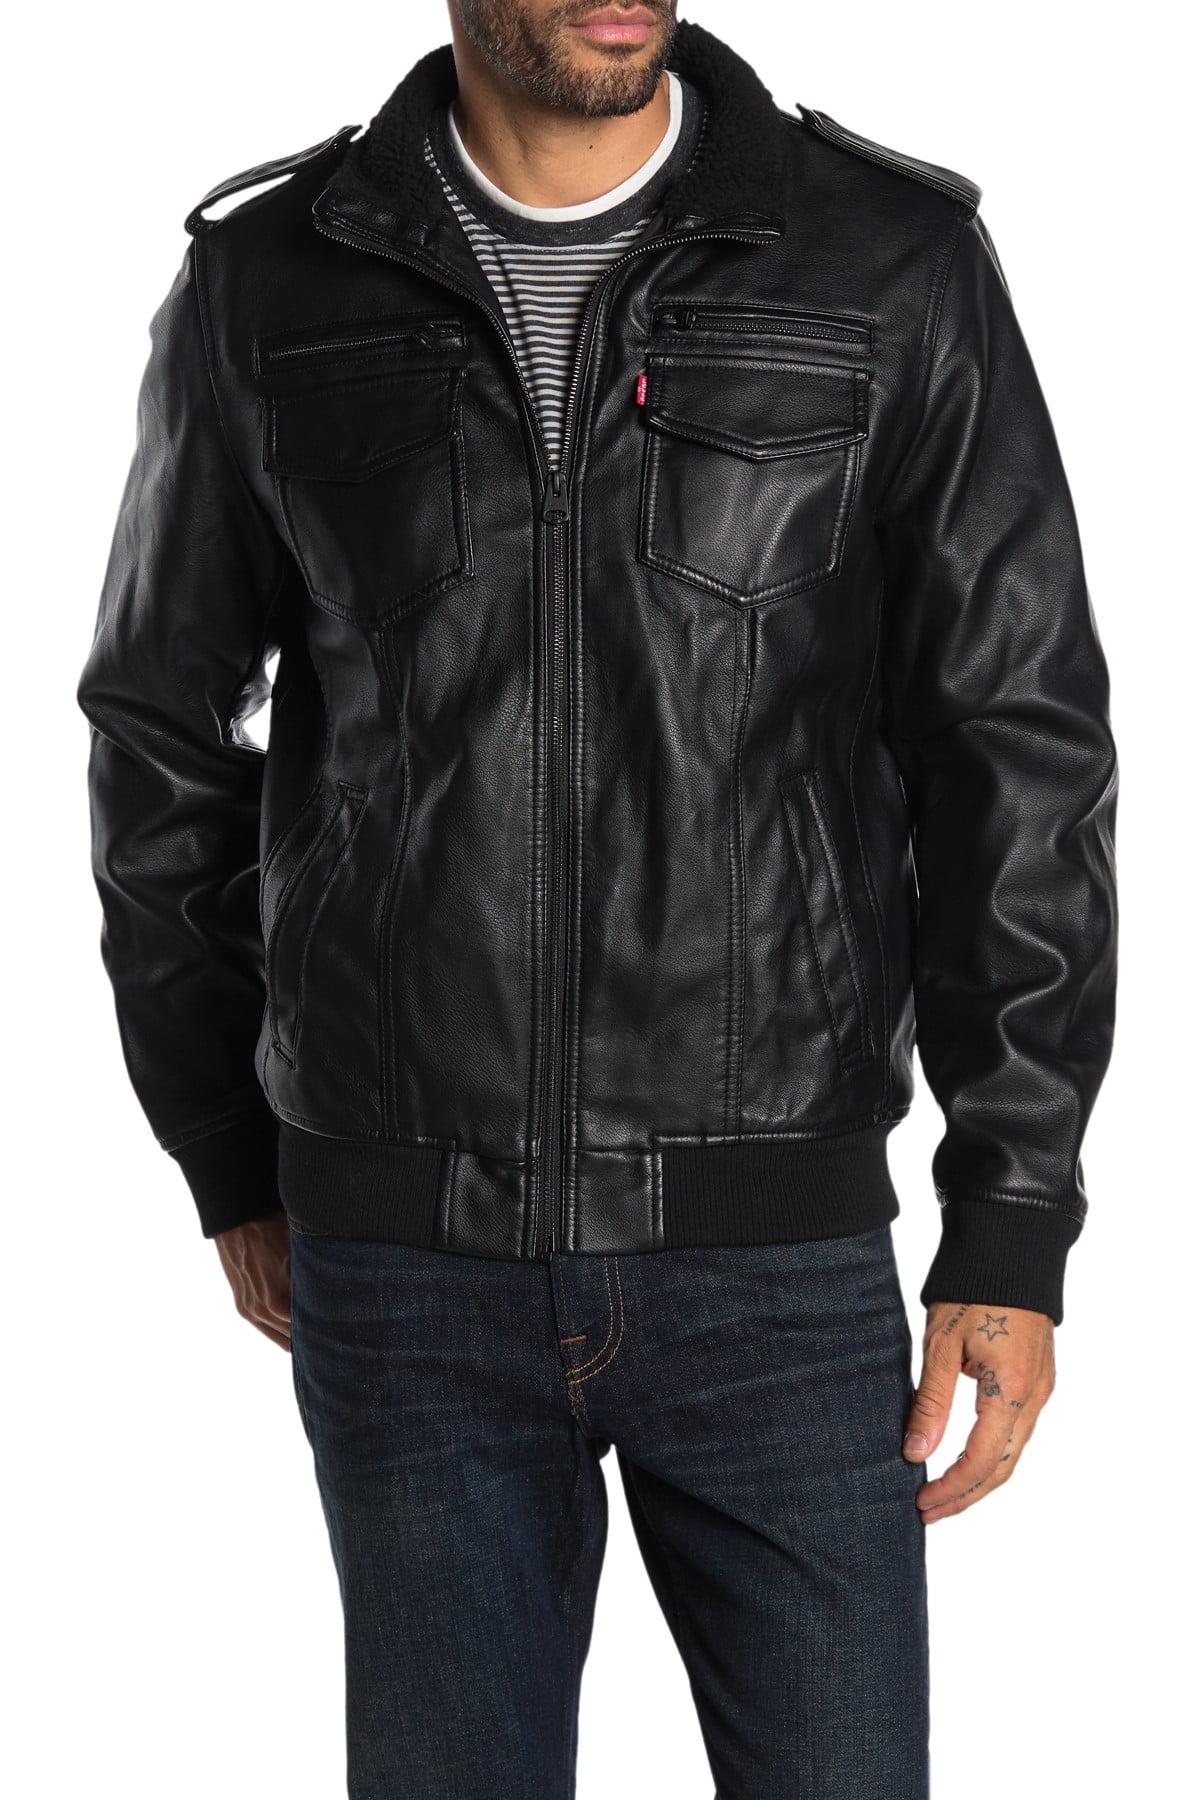 Levi's Faux Leather & Faux Shearling Bomber Jacket in Black for Men - Lyst